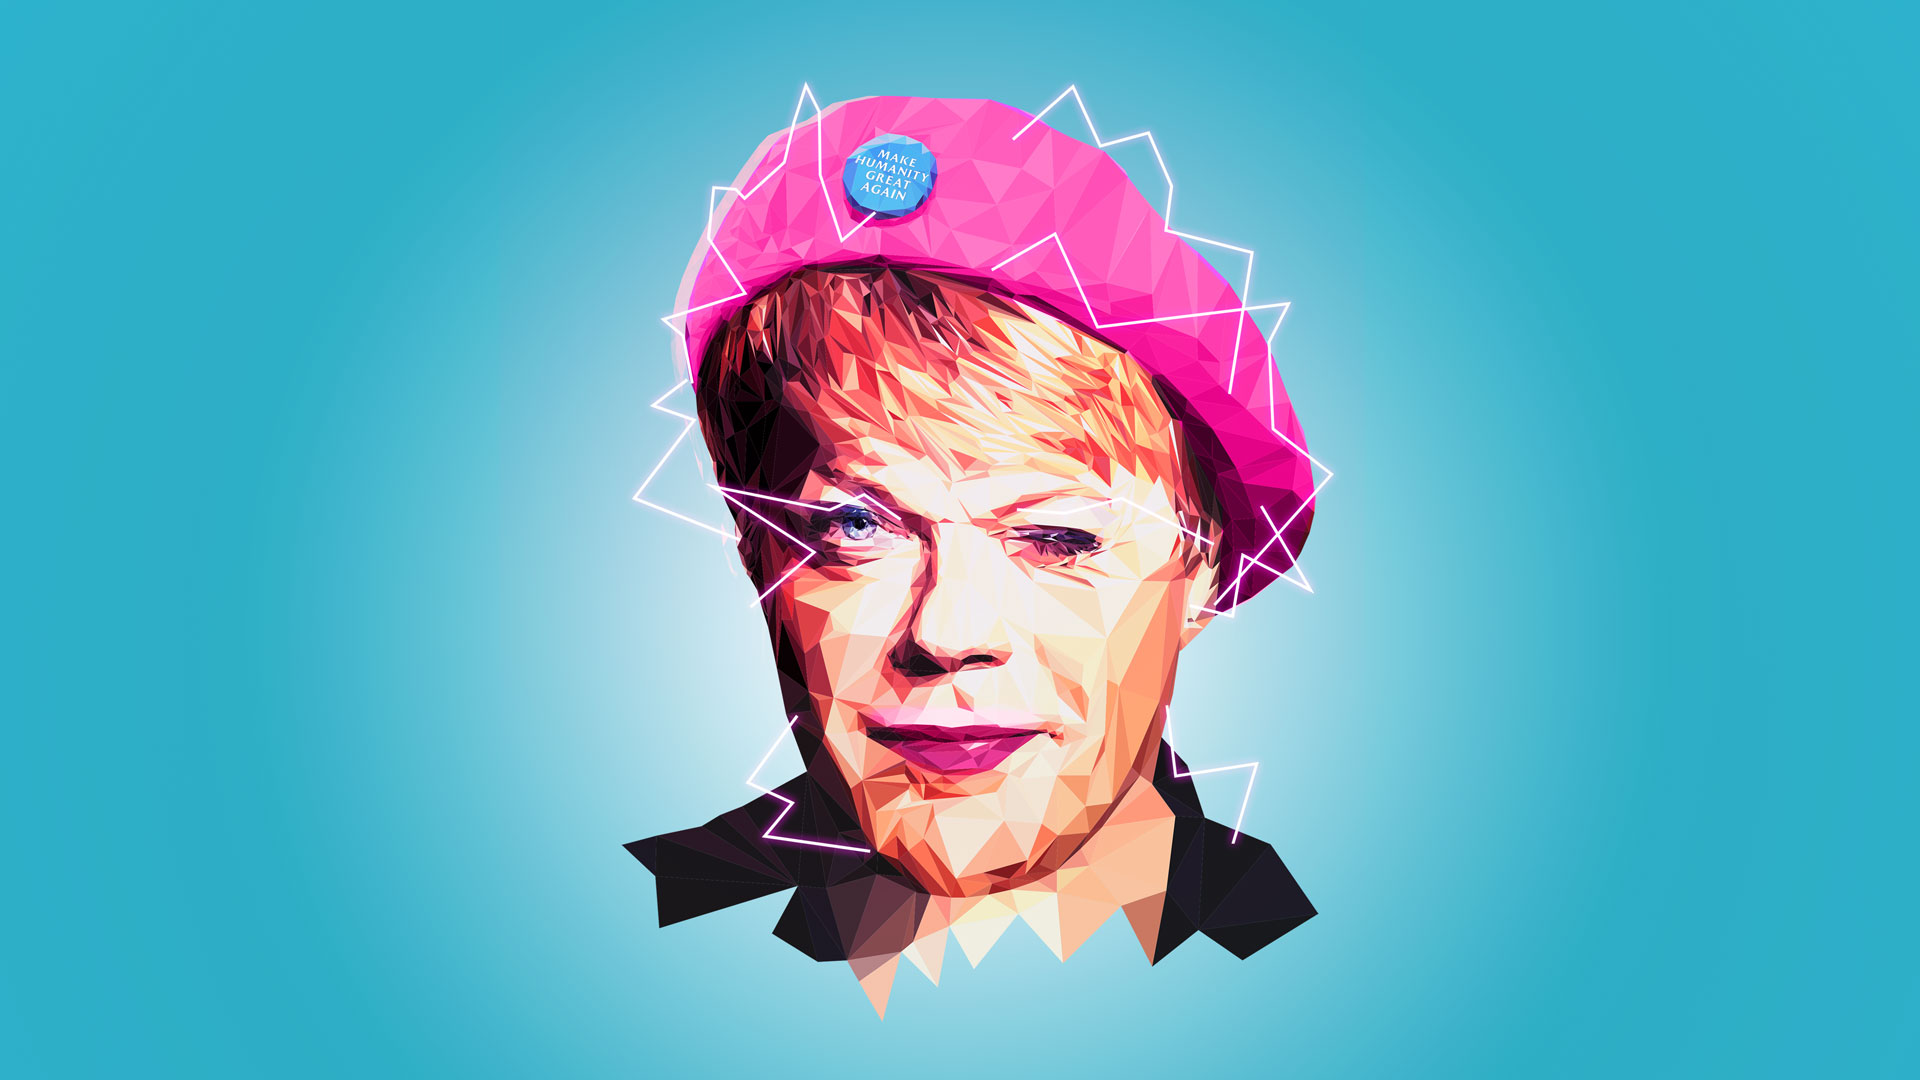 Eddie Izzard appears on the cover of The Big Issue